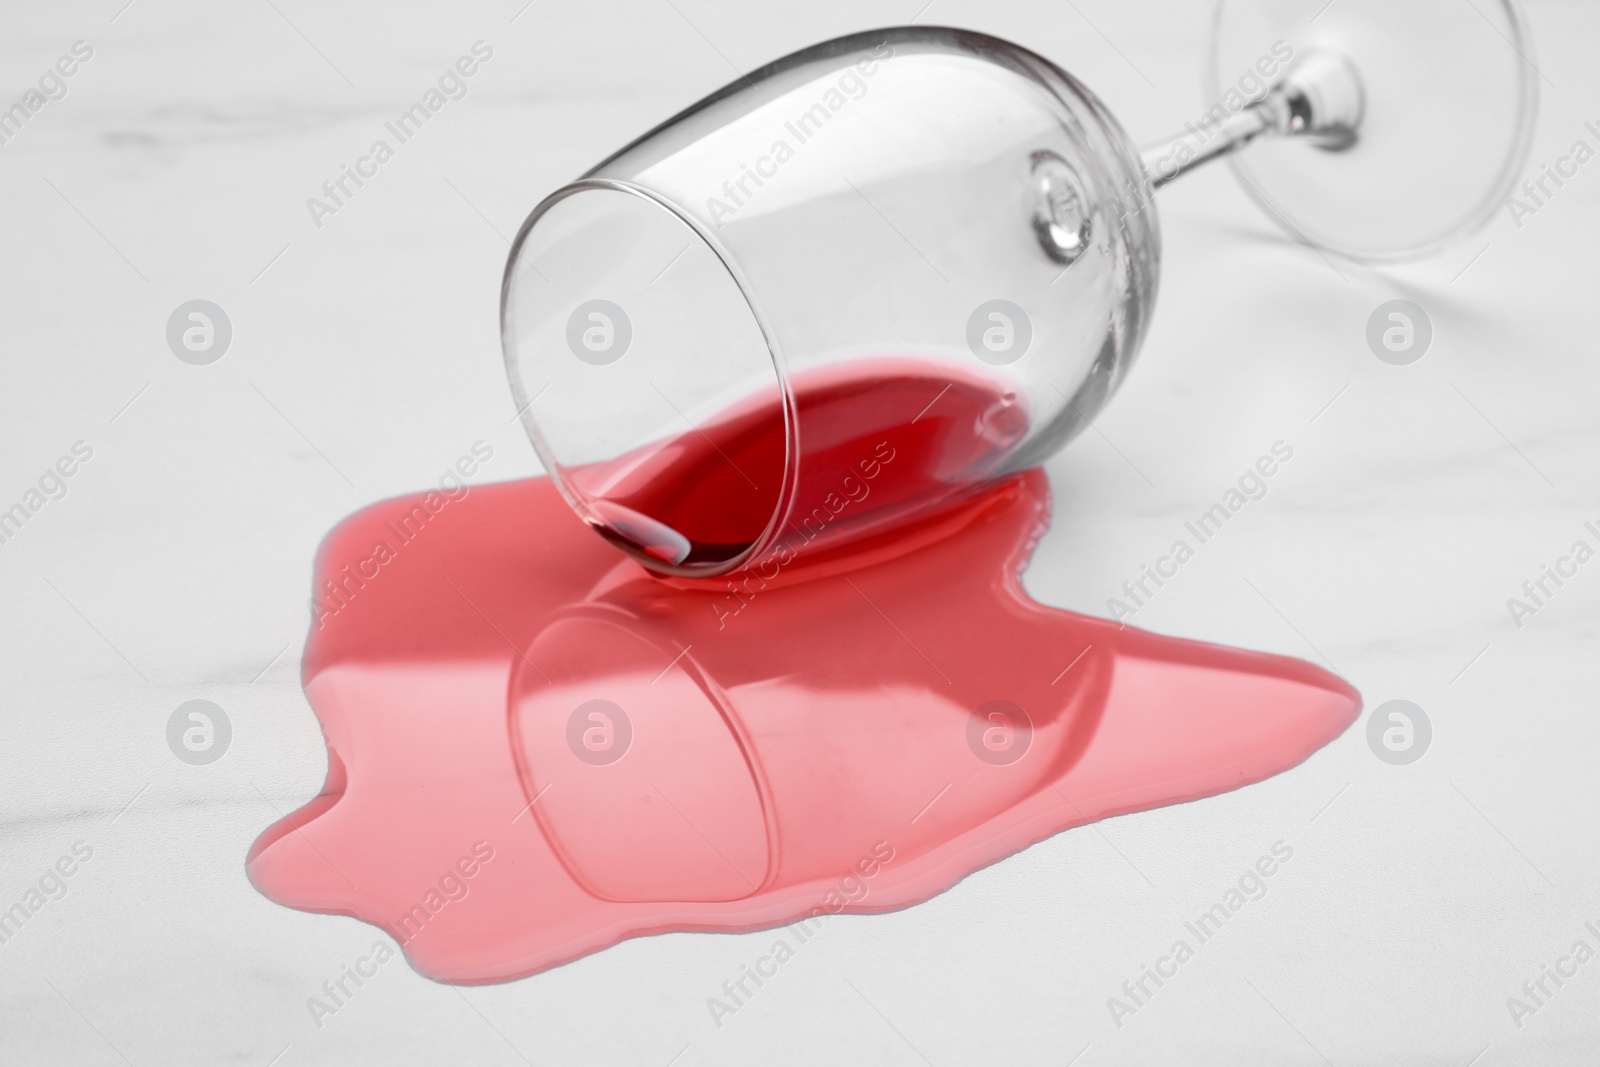 Photo of Glass with spilled red wine on white marble surface, closeup